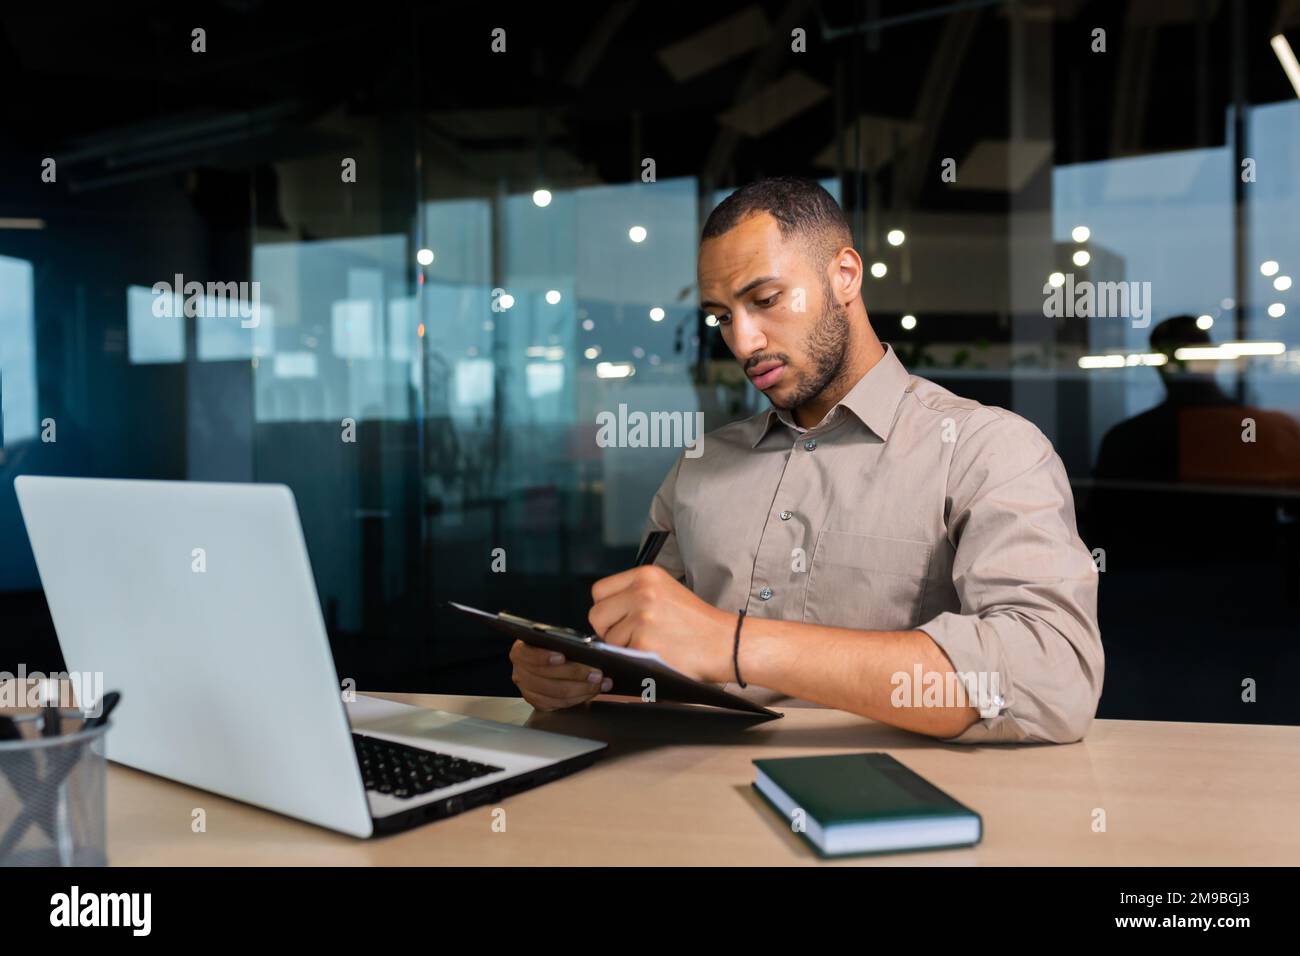 Serious concentrated businessman writing document while sitting in office using laptop for online learning, hispanic man in glasses listening to video call report at workplace. Stock Photo